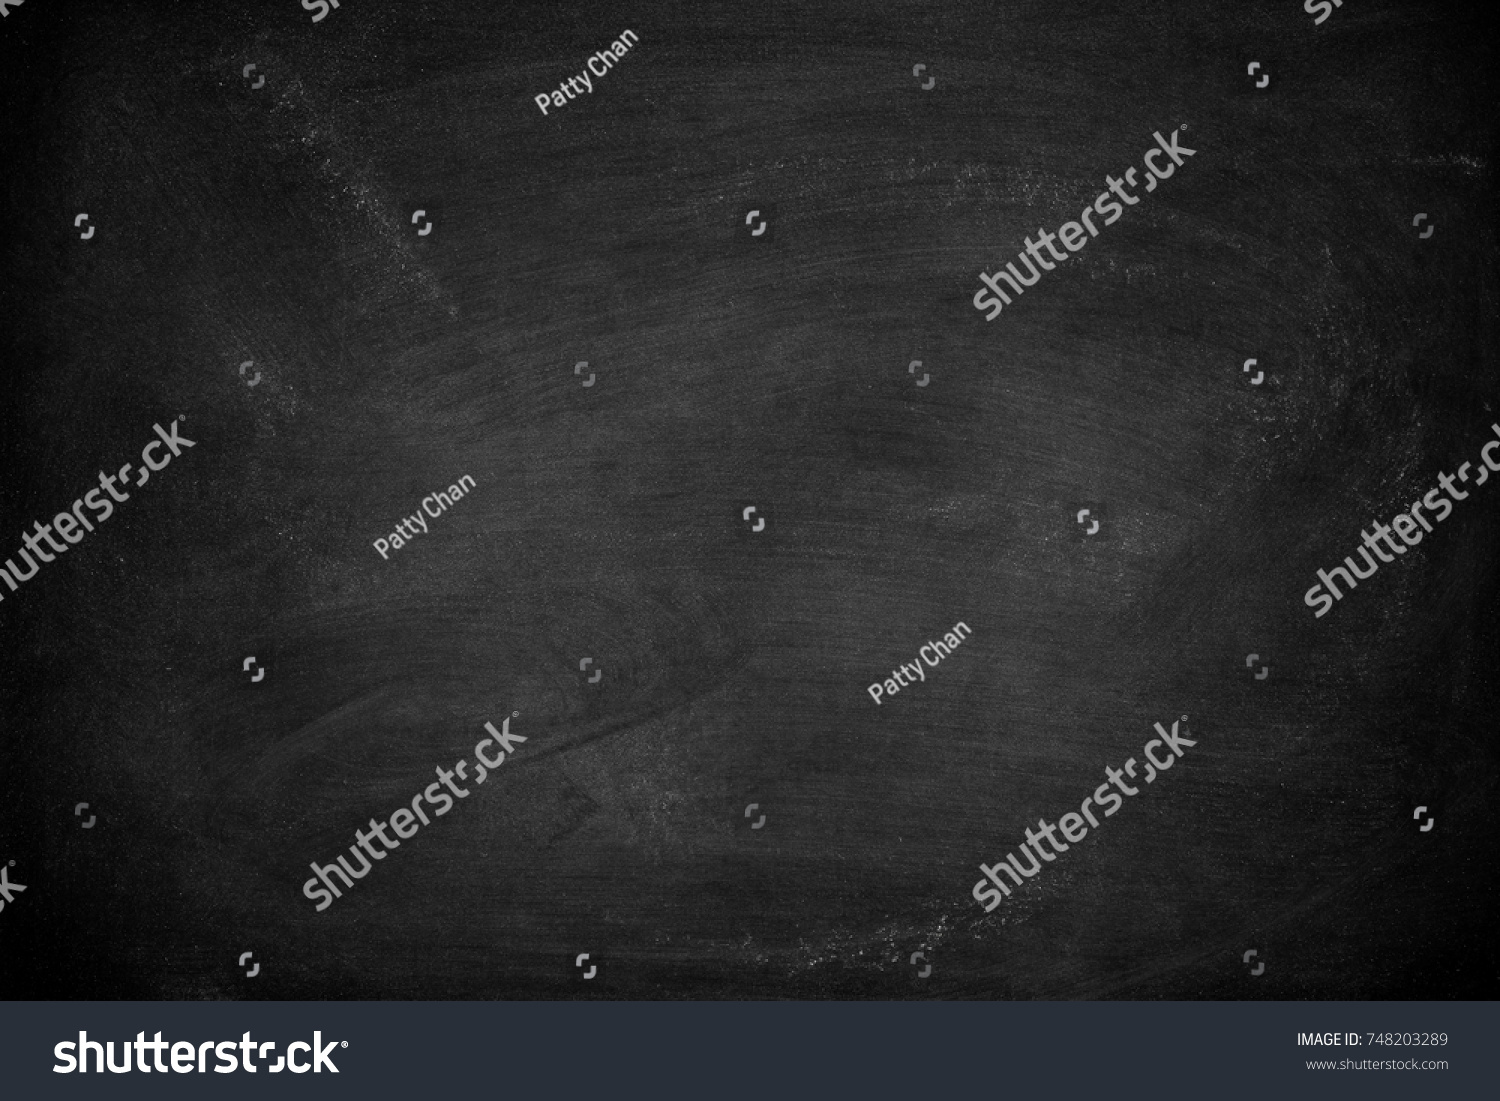 Abstract Chalk rubbed out on blackboard or chalkboard texture. clean school board for background or copy space for add text message.  #748203289